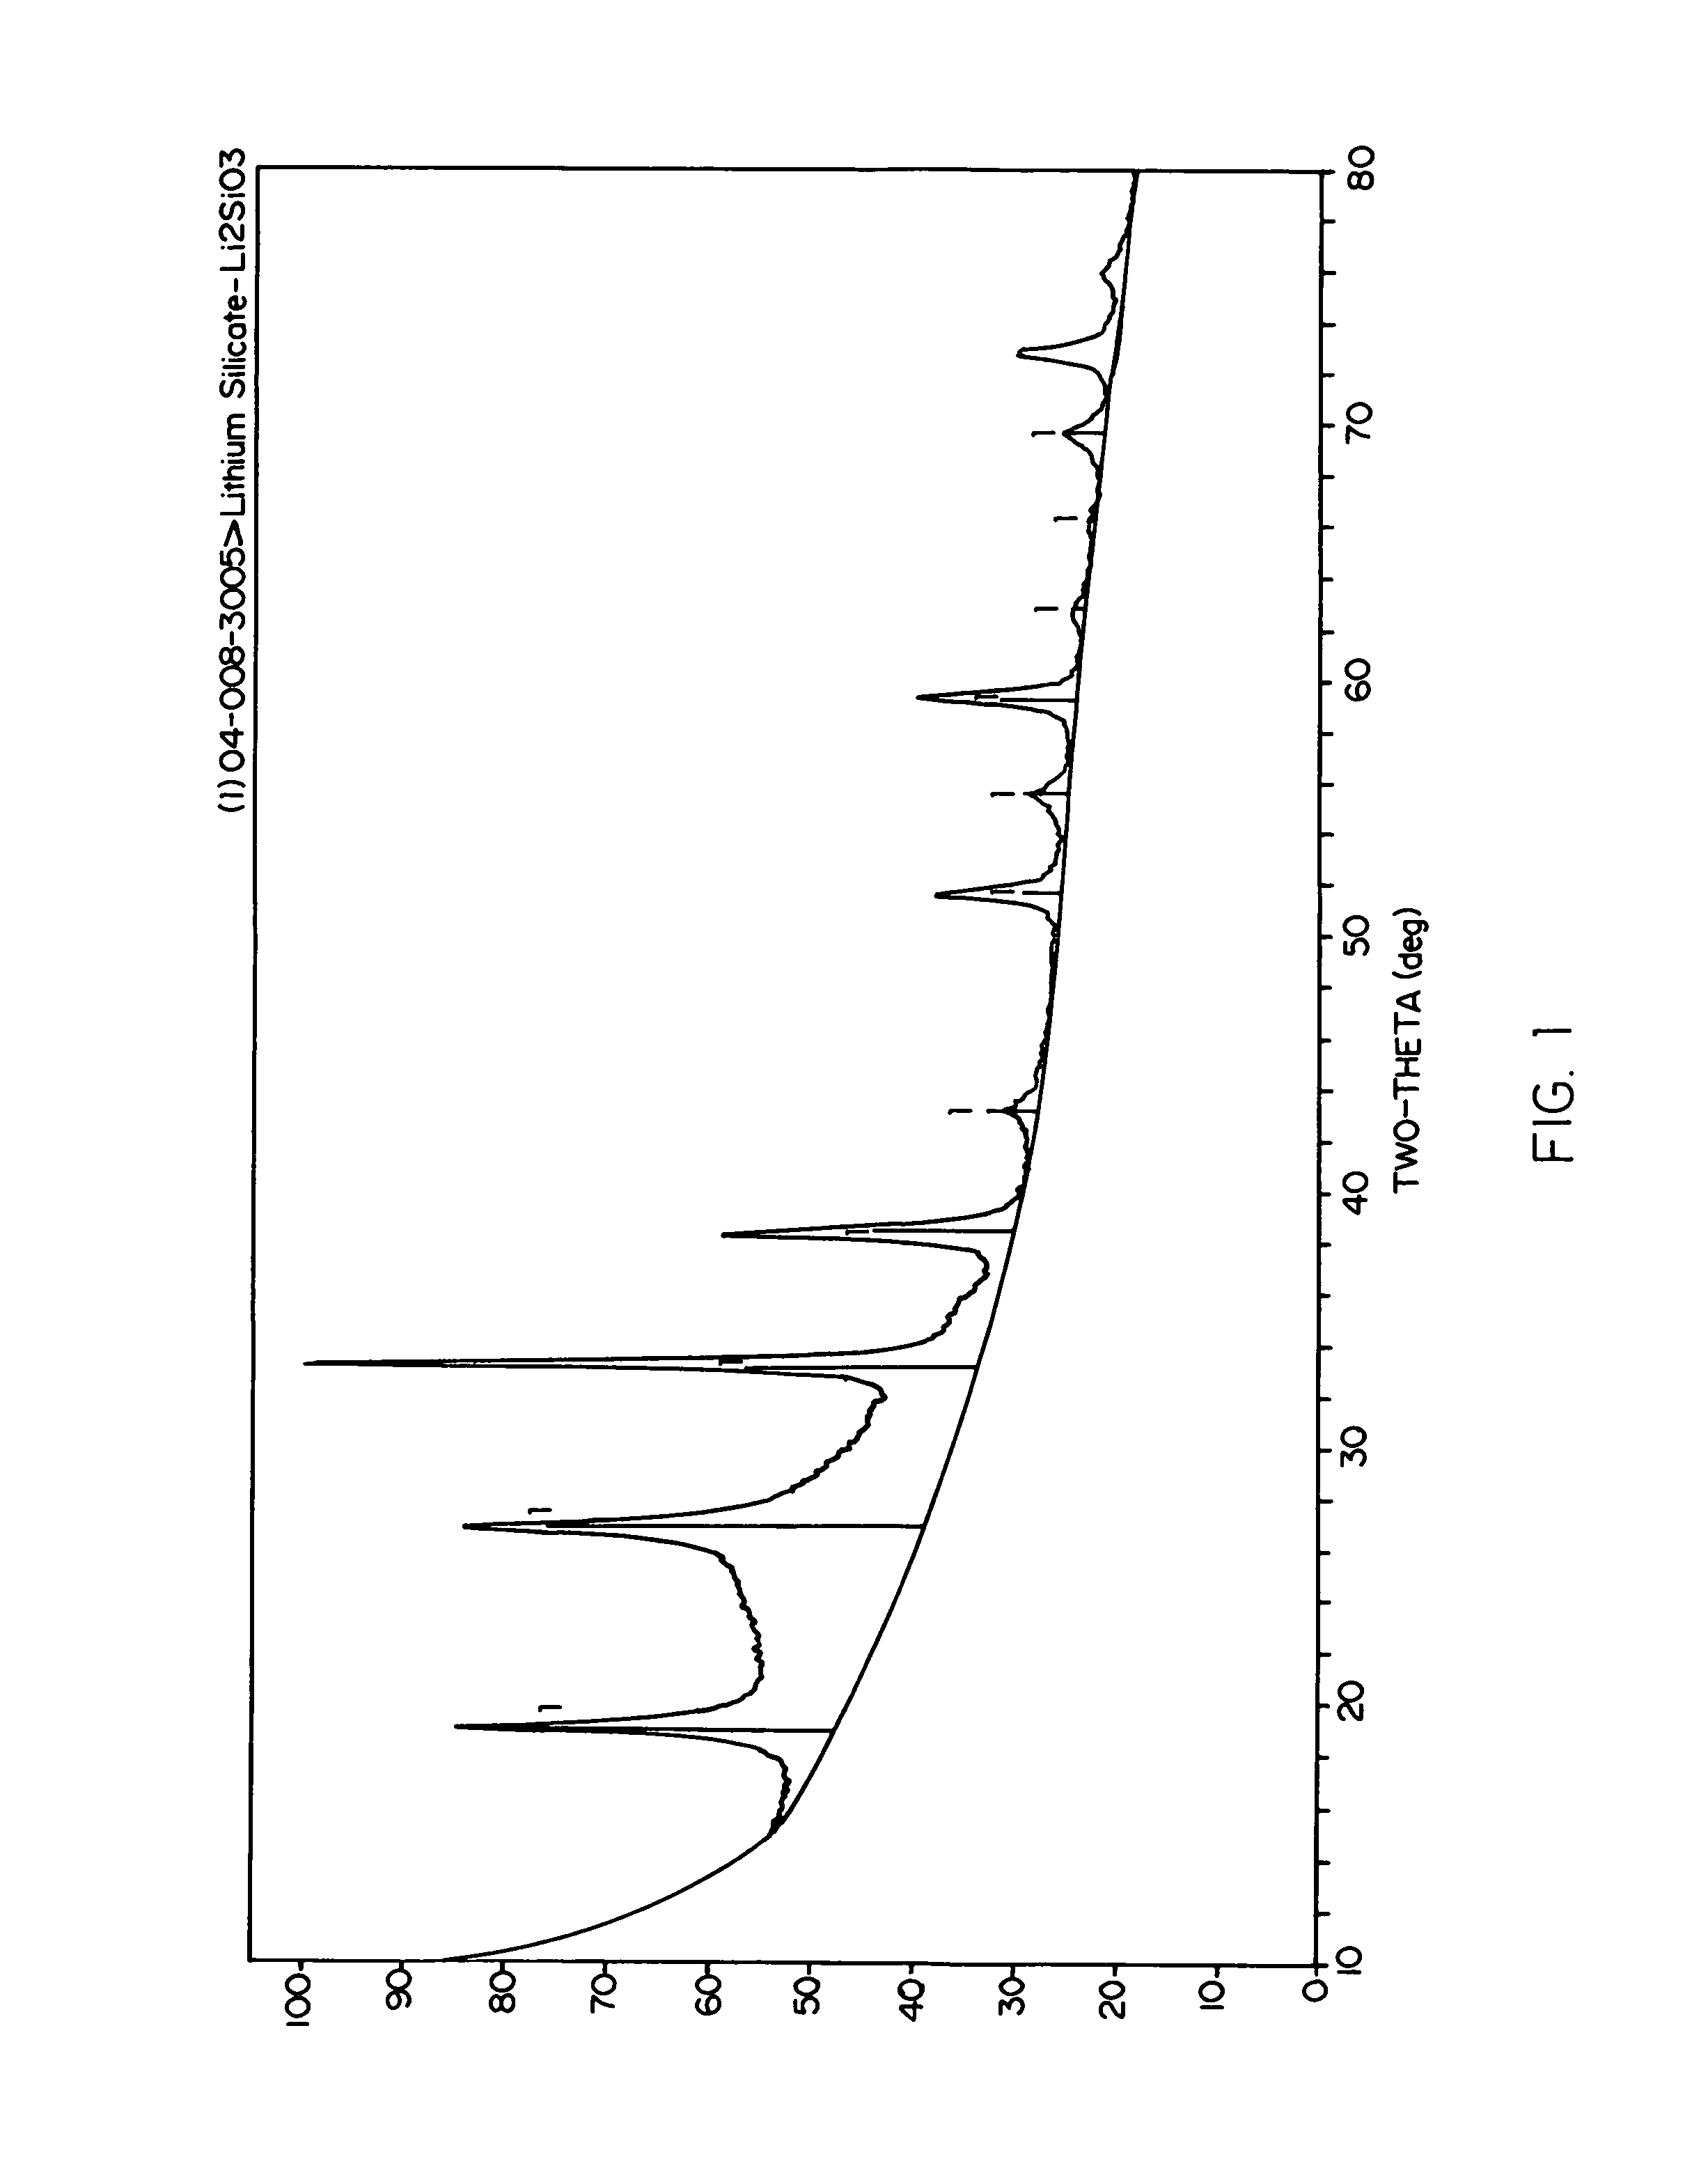 Lithium silicate glass ceramic for fabrication of dental appliances